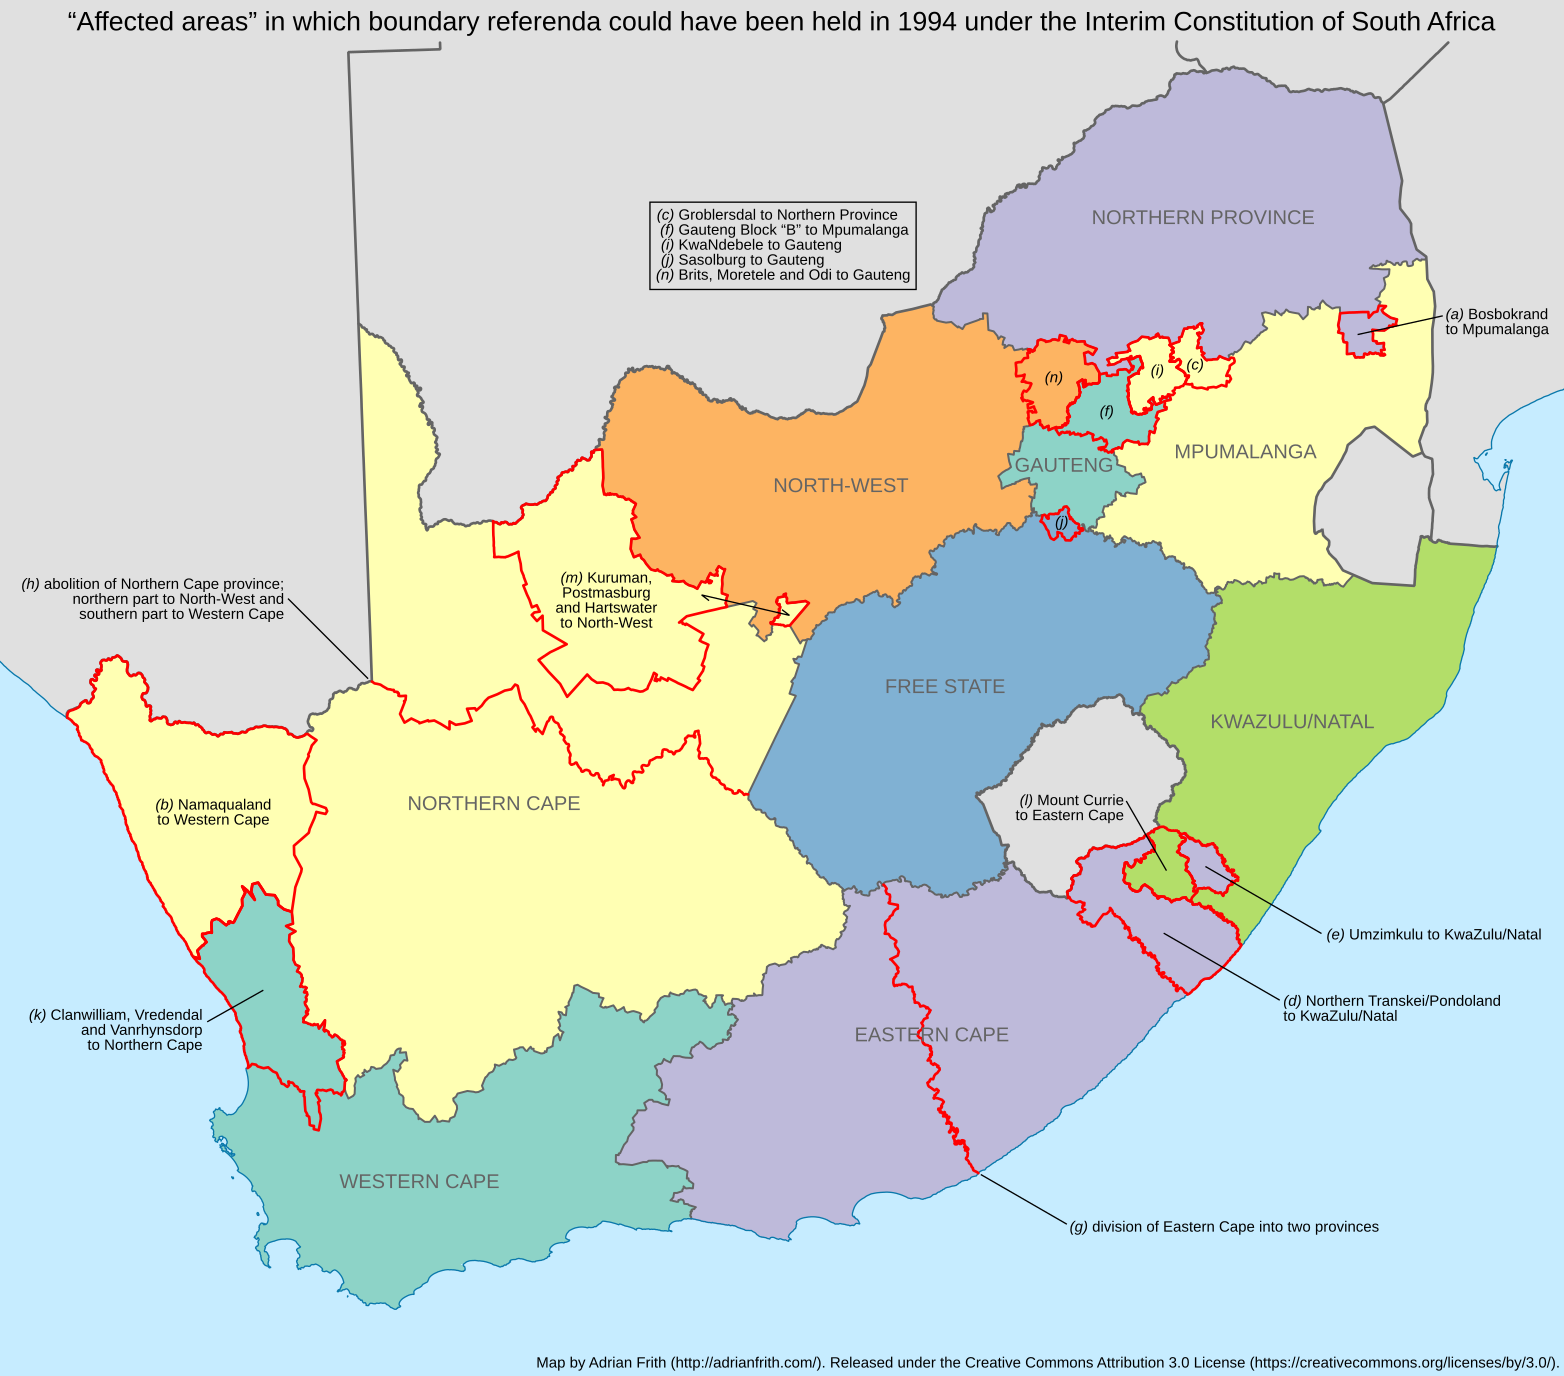 A map of South Africa, showing the provincial boundaries in 1994 and the affected areas in which referenda might have been held under the Interim Constitution.